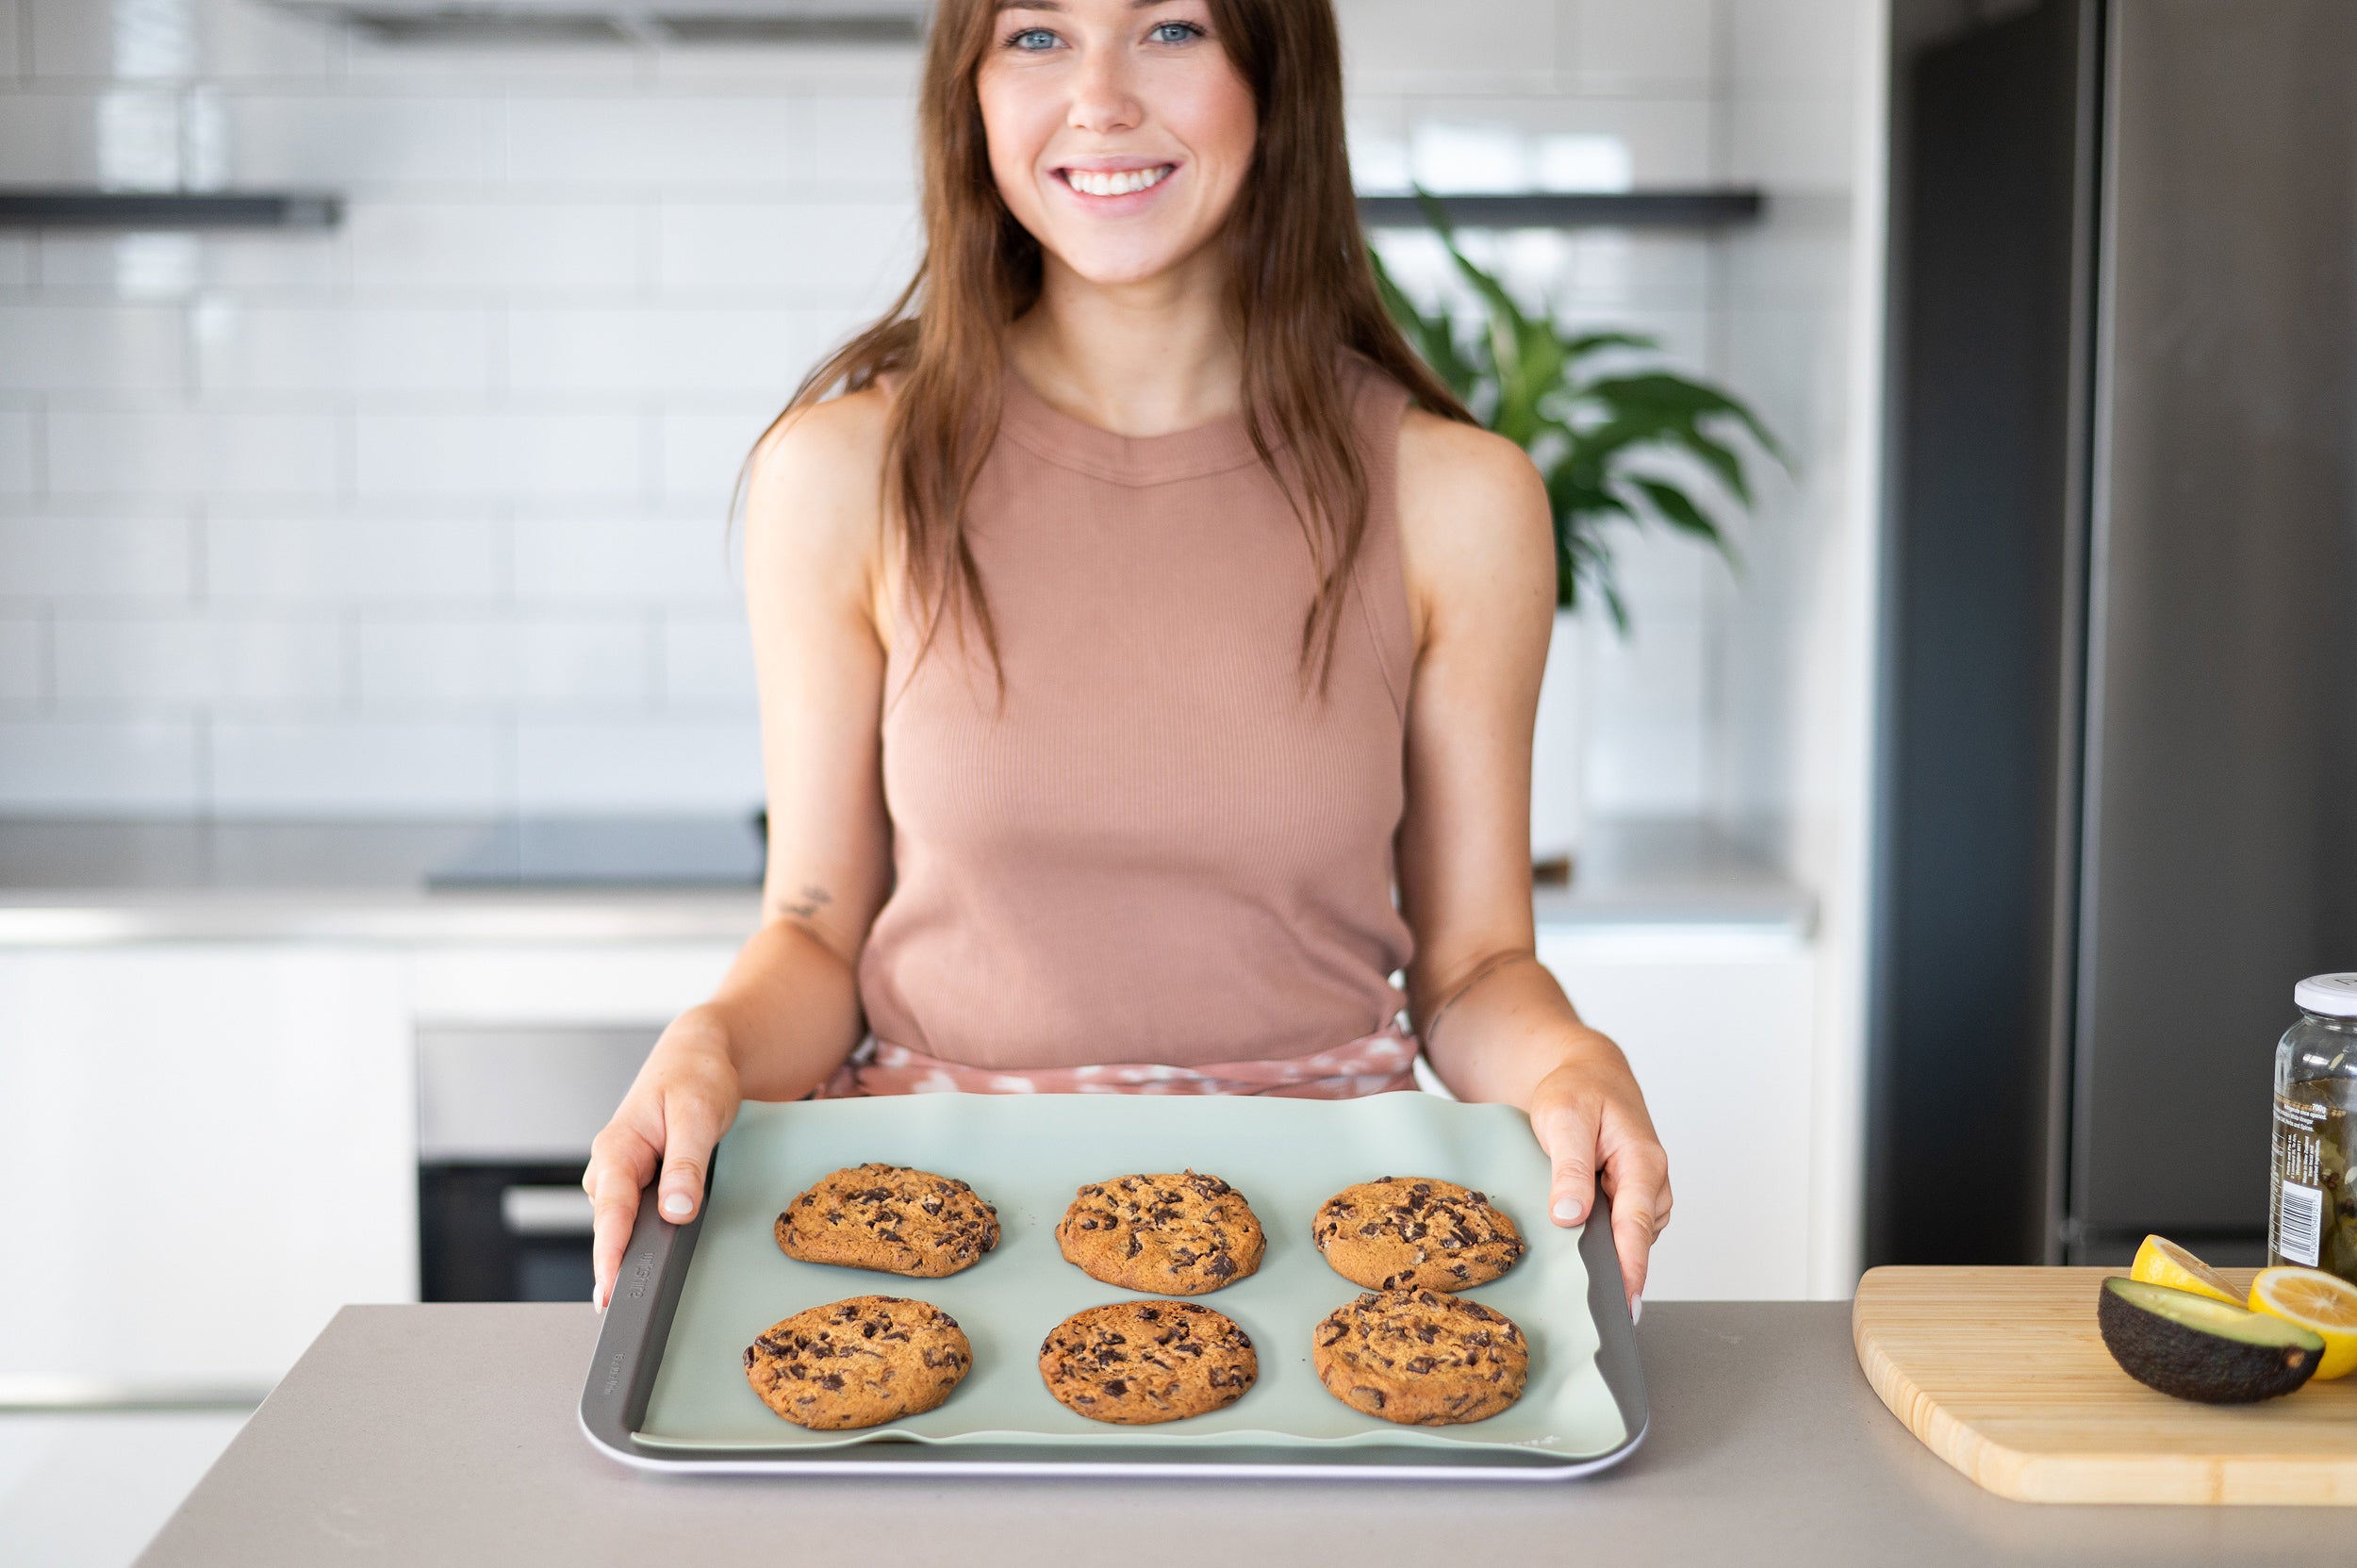 Green Reusable Baking Mat on a tray with cookies and woman smiling